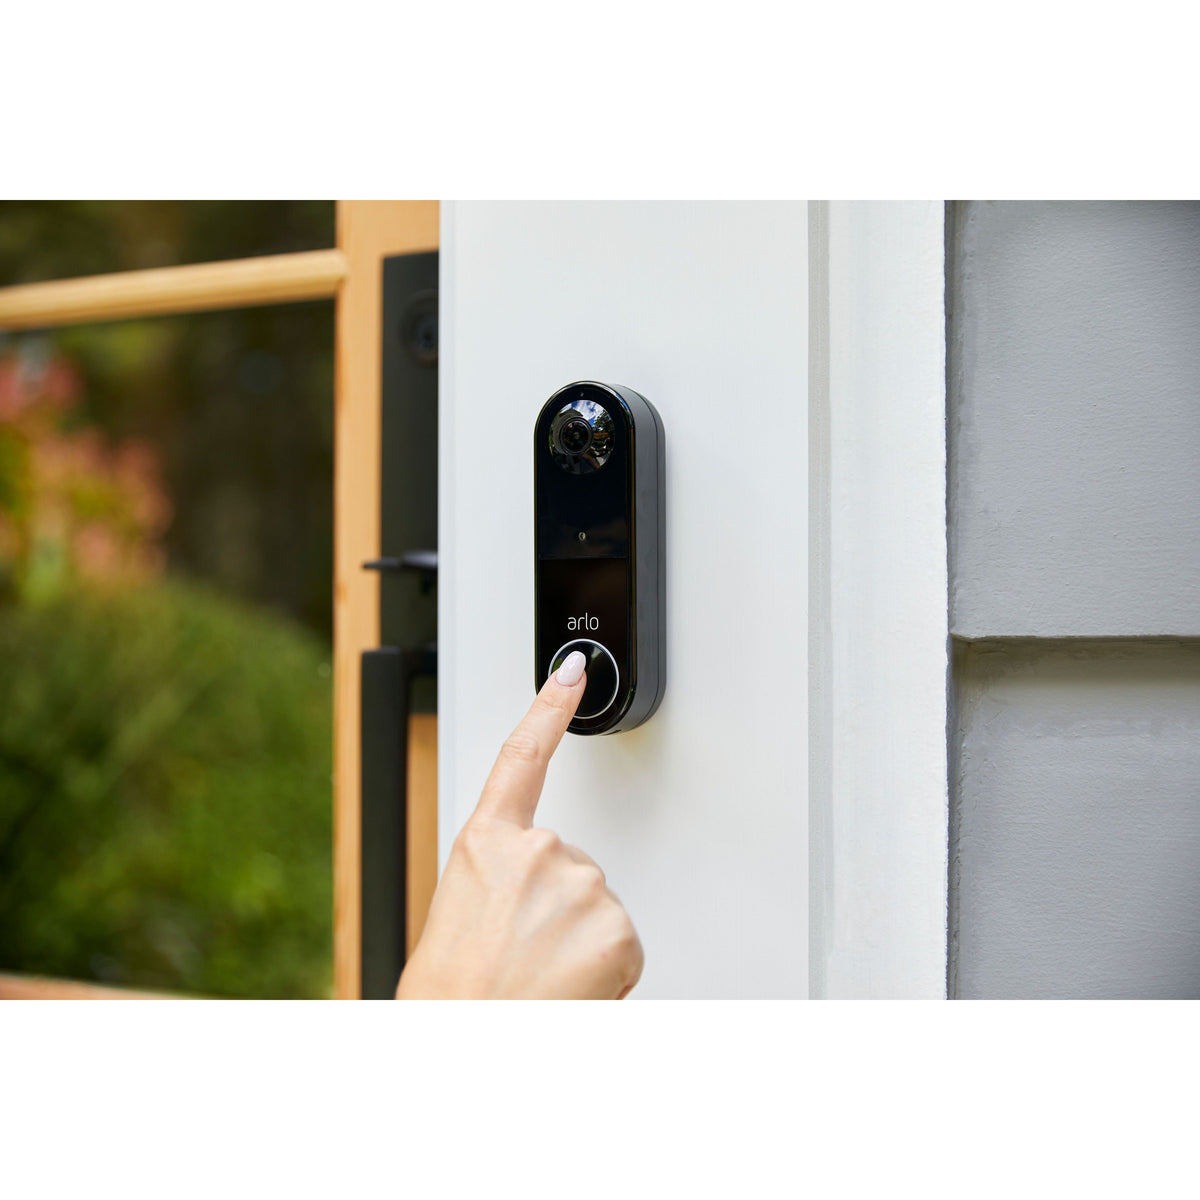 Arlo Essential Wire Free Video Doorbell -  Black | AVD2001B100EUS from Arlo - DID Electrical